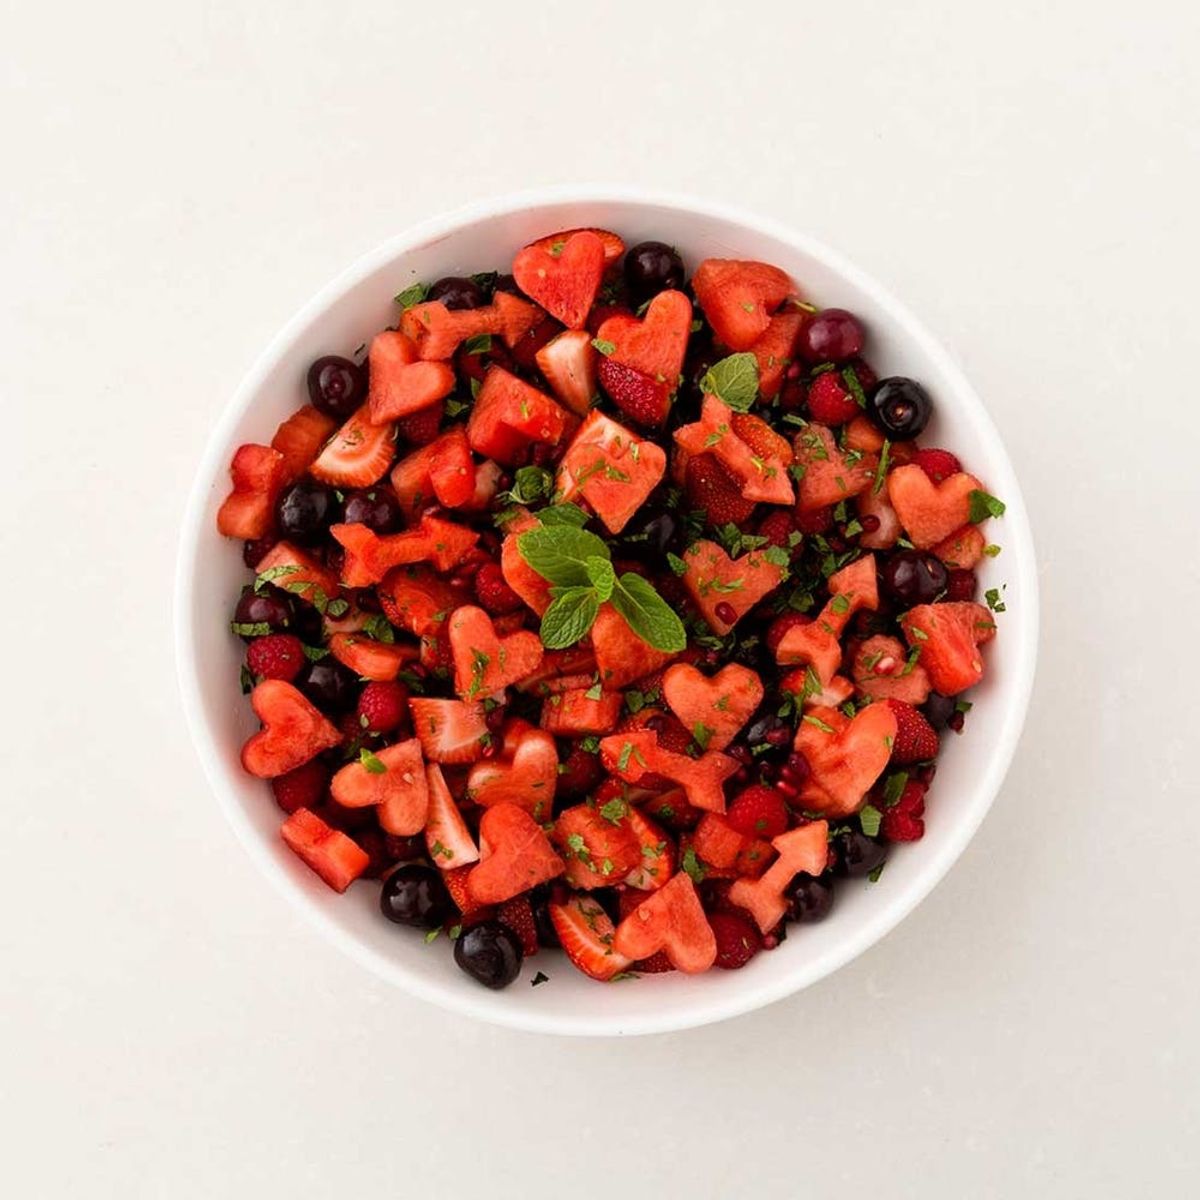 Make This Valentine’s Day Fruit Salad for Your Boo